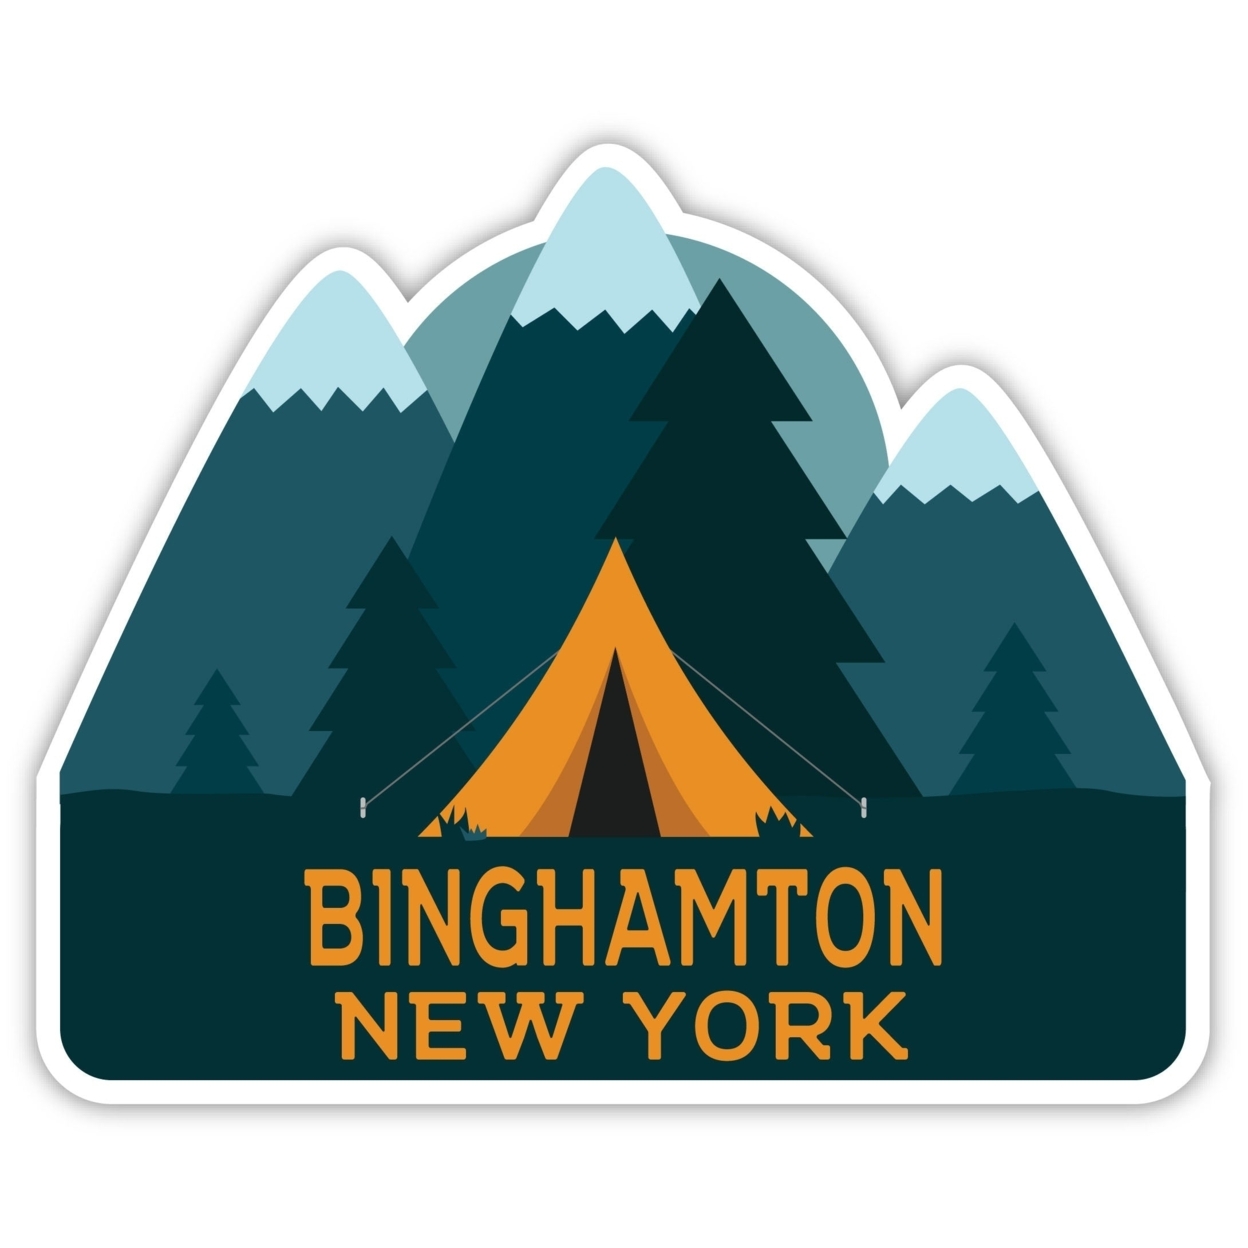 Binghamton New York Souvenir Decorative Stickers (Choose Theme And Size) - 4-Pack, 6-Inch, Tent